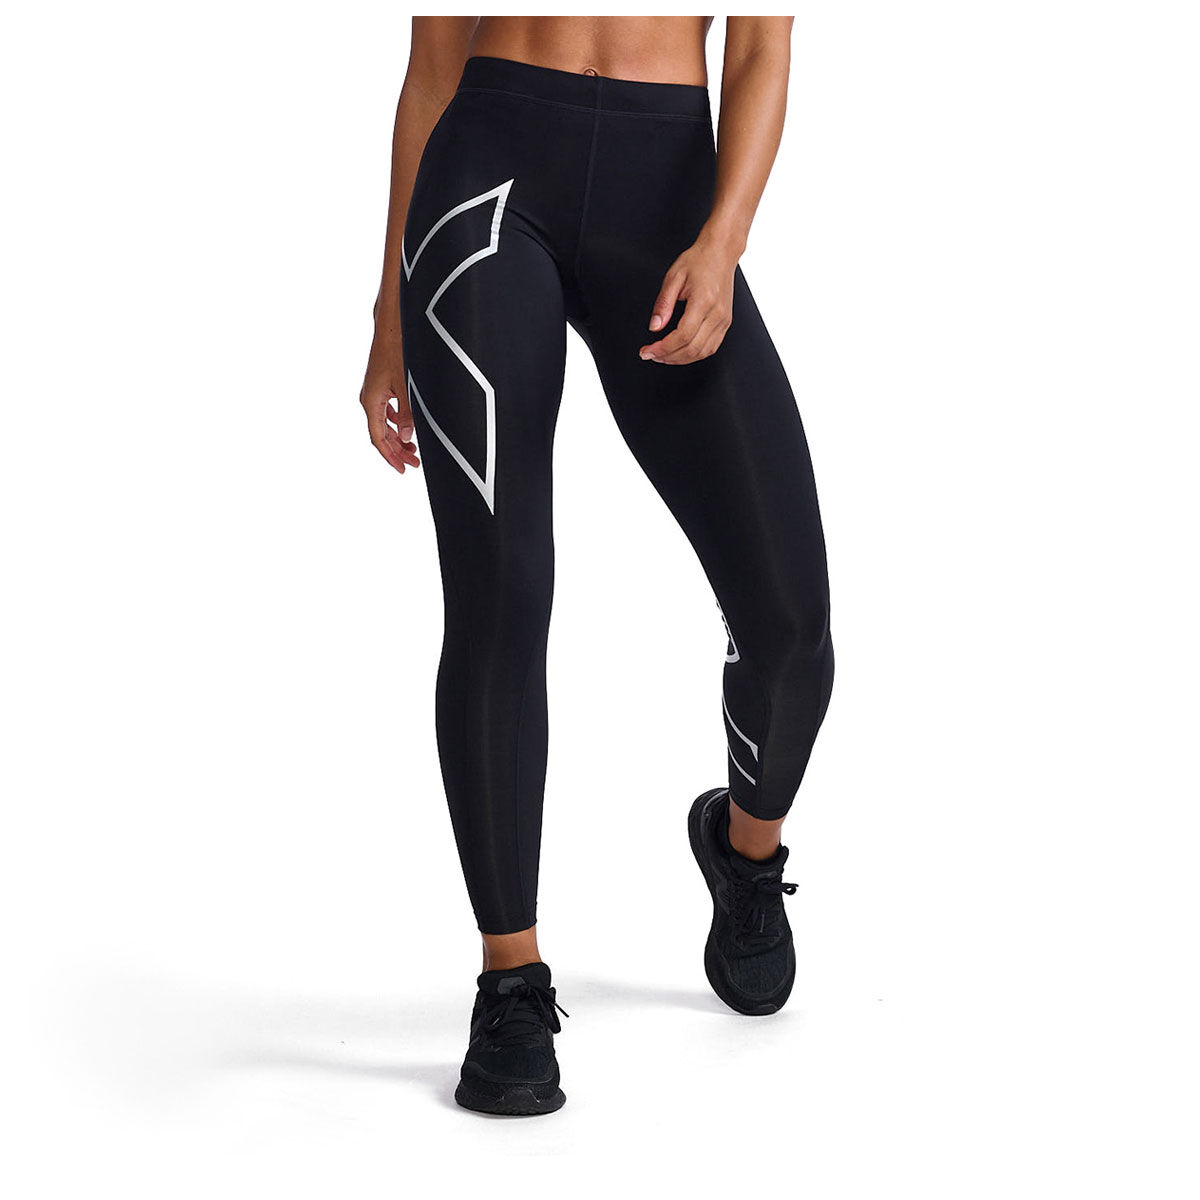 Running Tights Vs Compression Tights Whats The Difference  The Wired  Runner